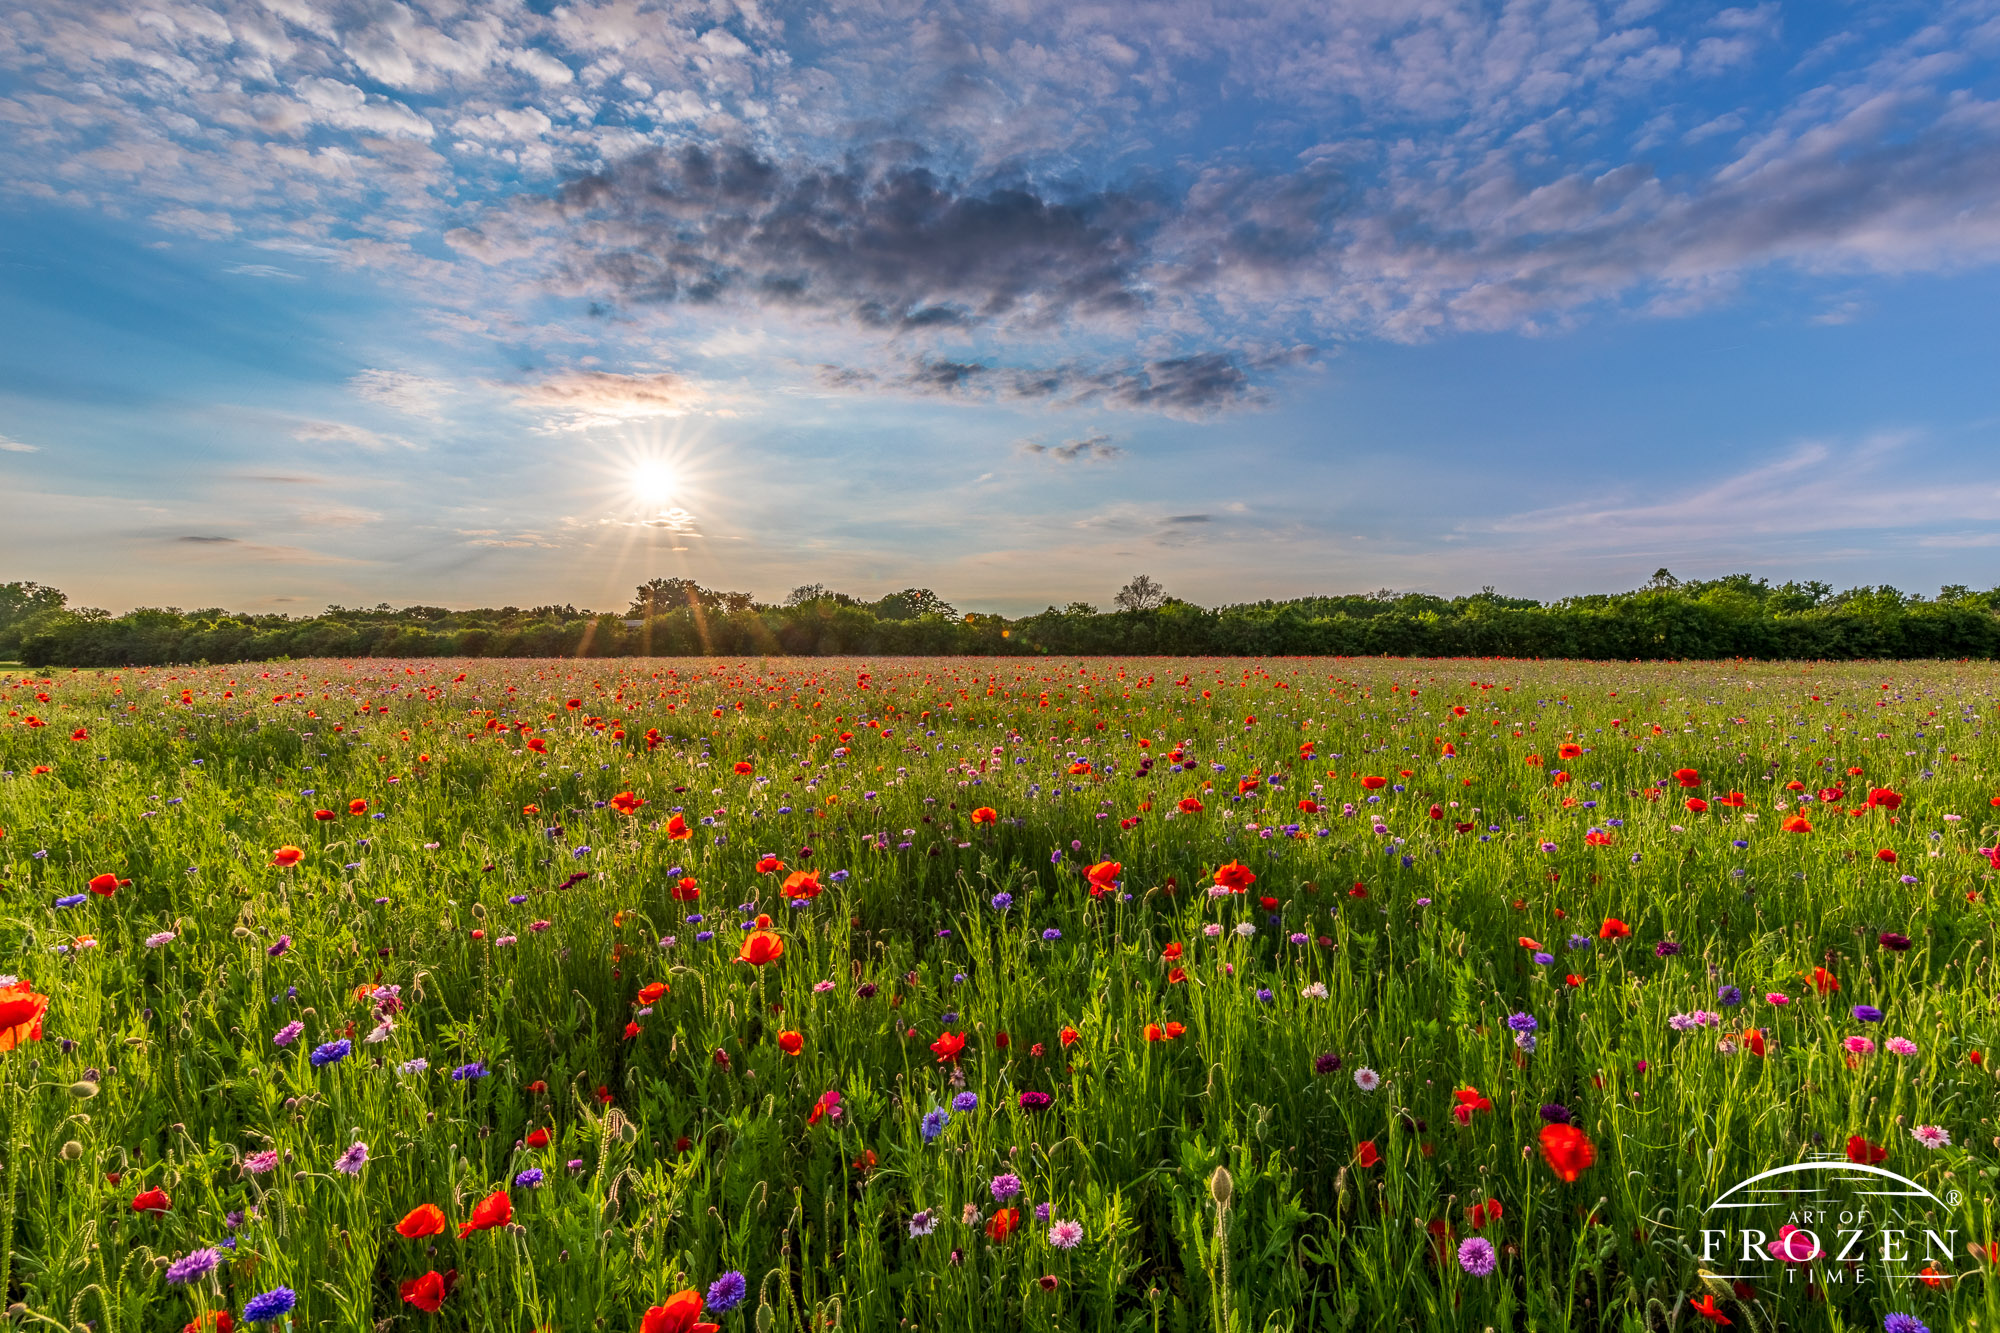 The setting sun hangs over this prairie scene where the photographer rendered the bright orb as a sunburst that warmly backlights the red poppies and host of purple and pink wildflowers which stretch on for a couple acres.